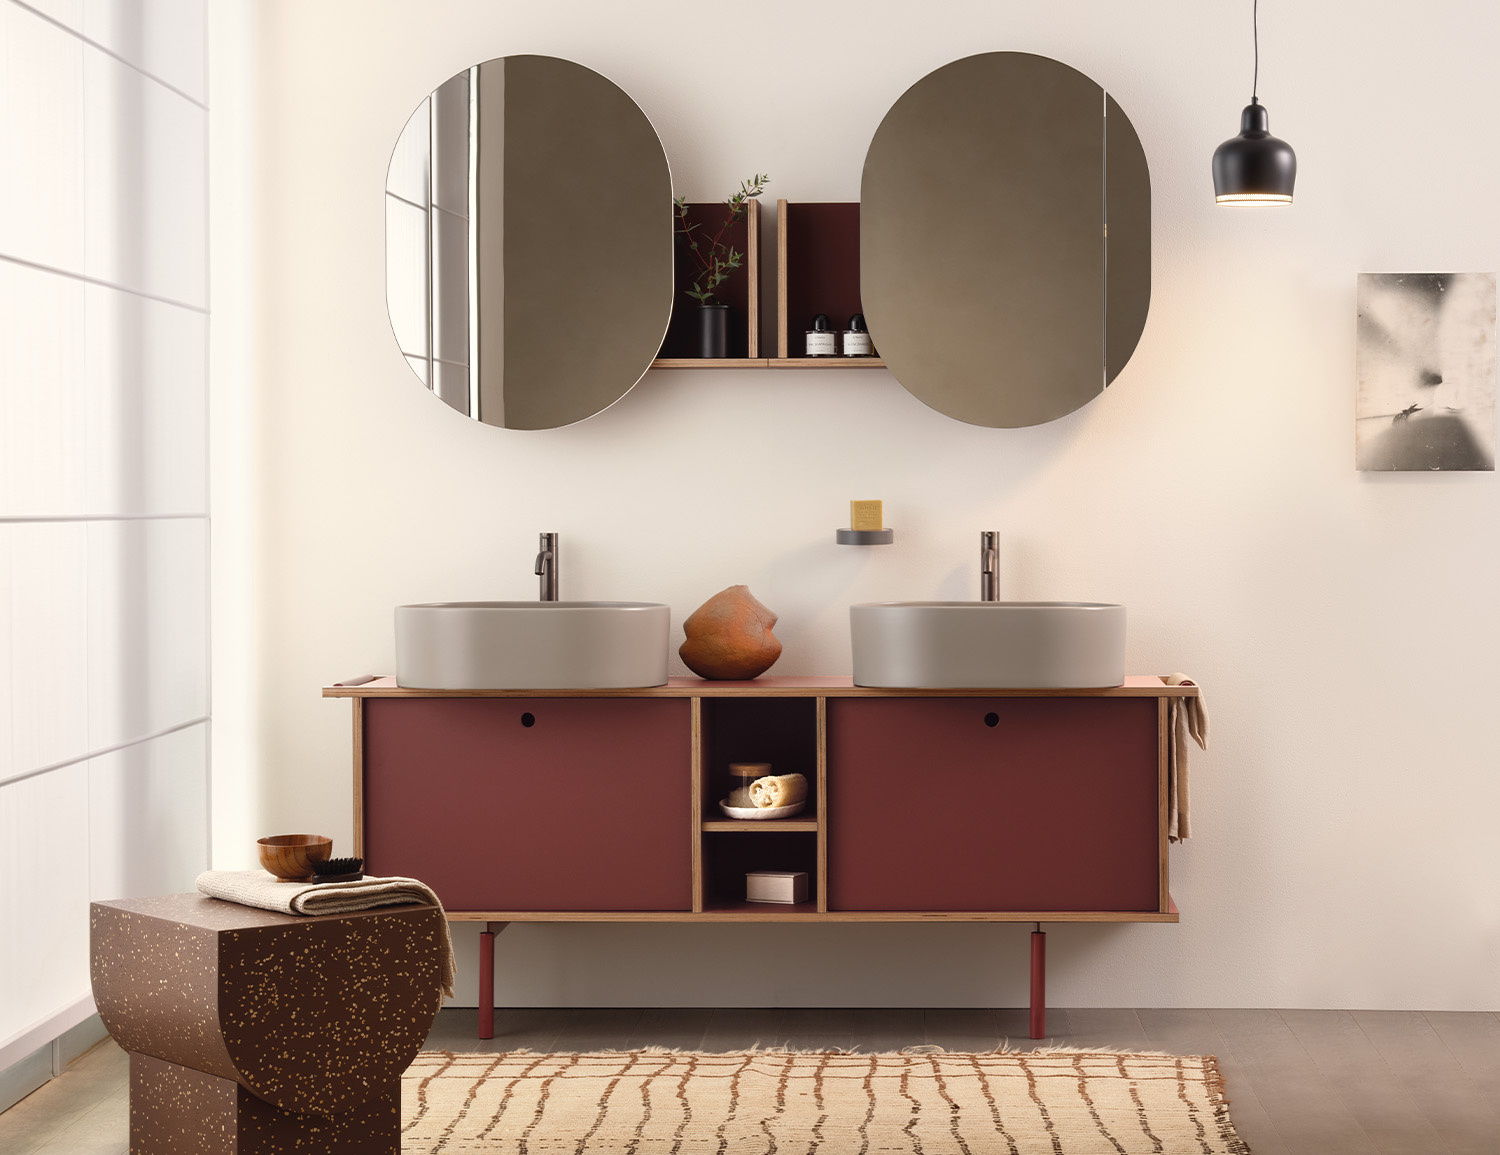 THEO 175 remporte les Archiproducts Design Awards 2023